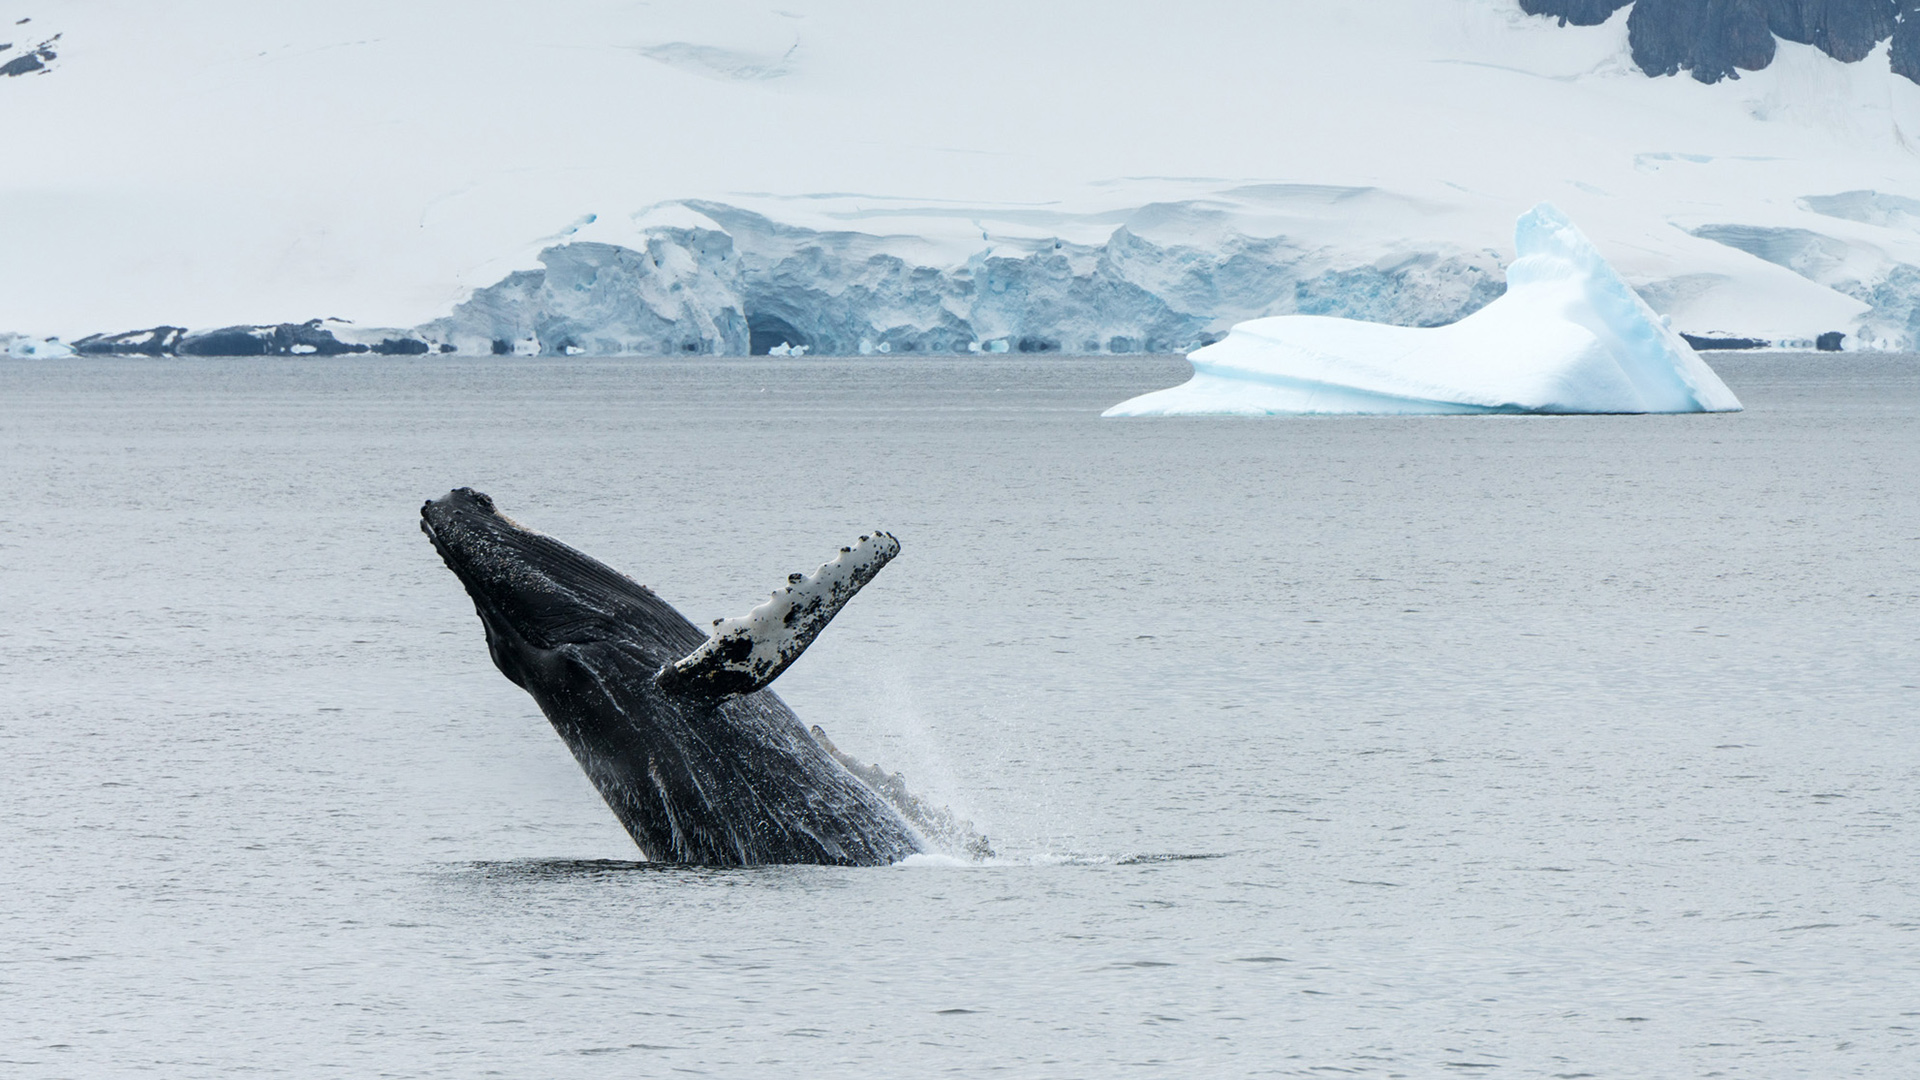 The Season of the Whales in Antarctica